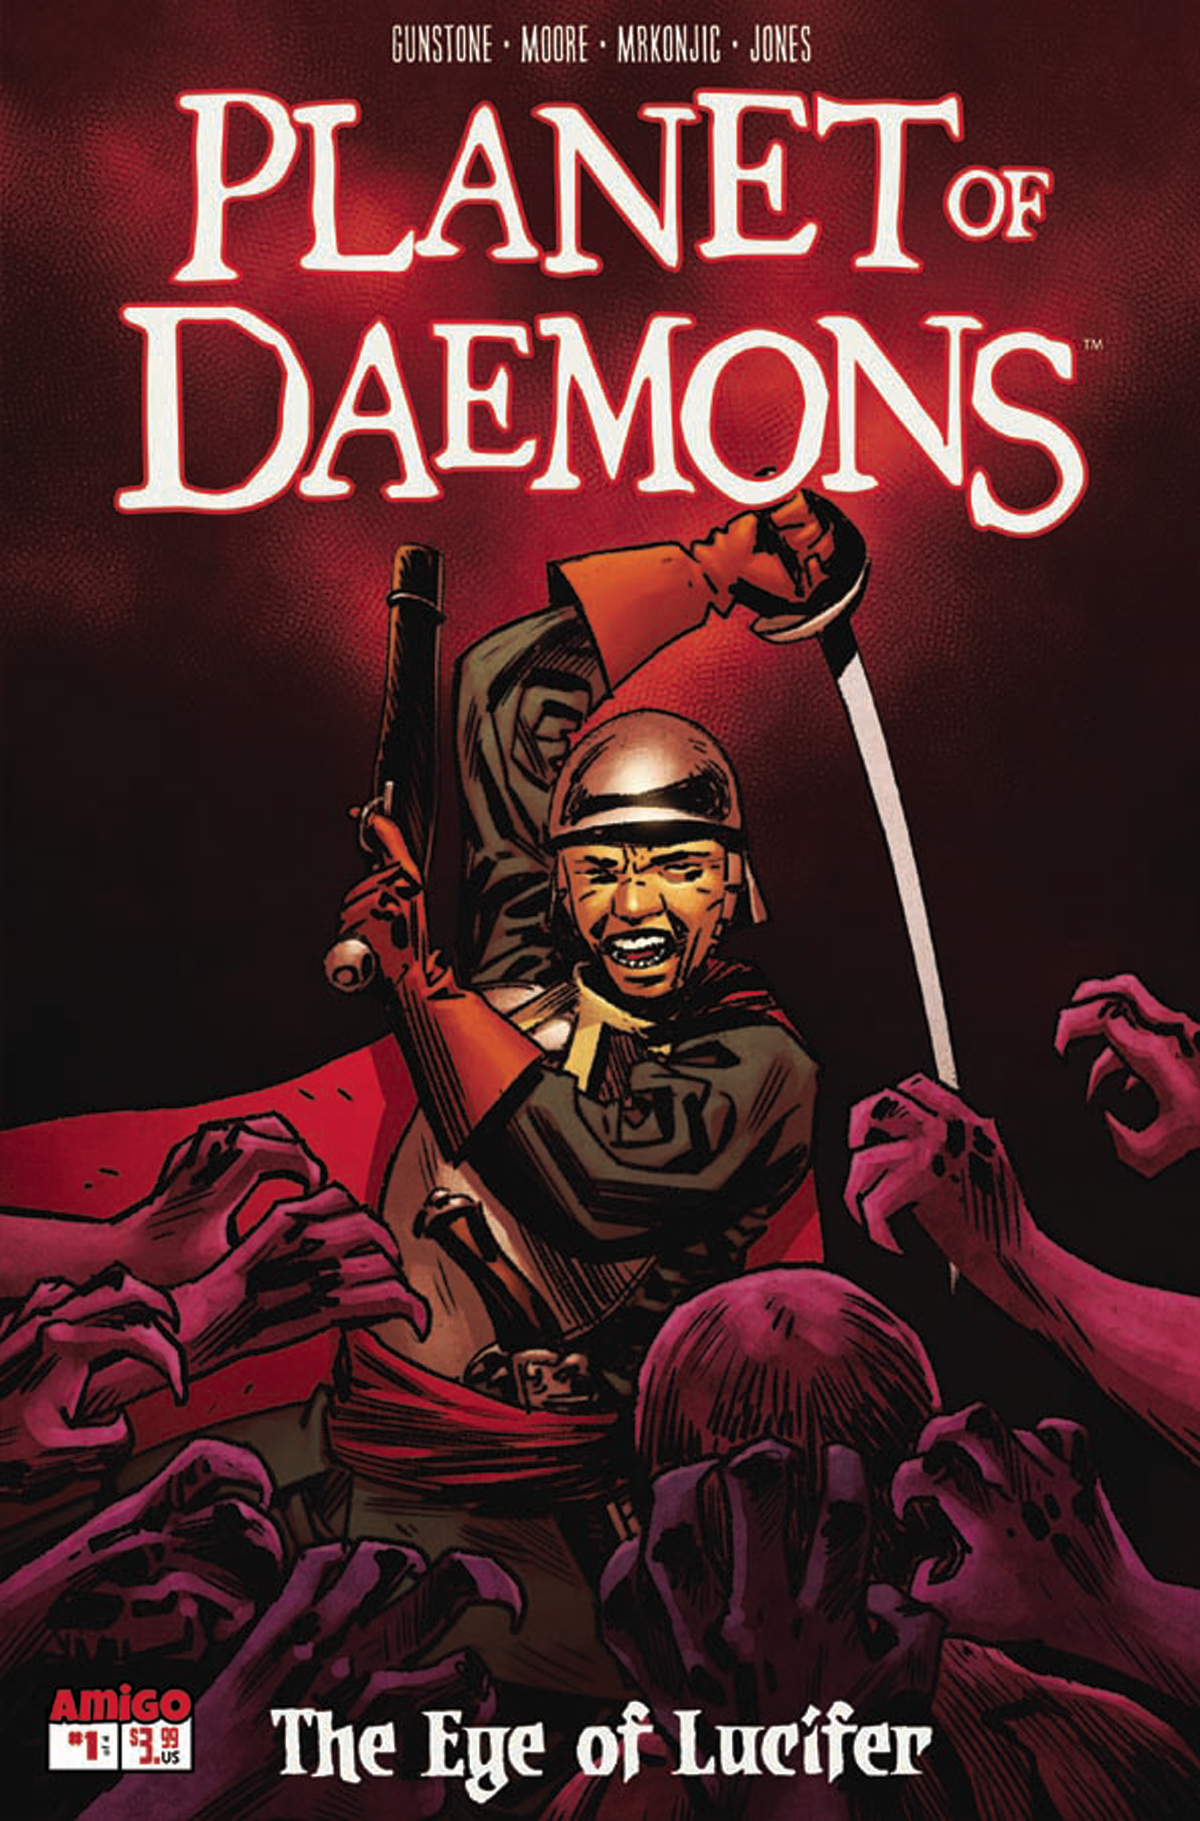 PLANET OF DAEMONS #1 (OF 4)